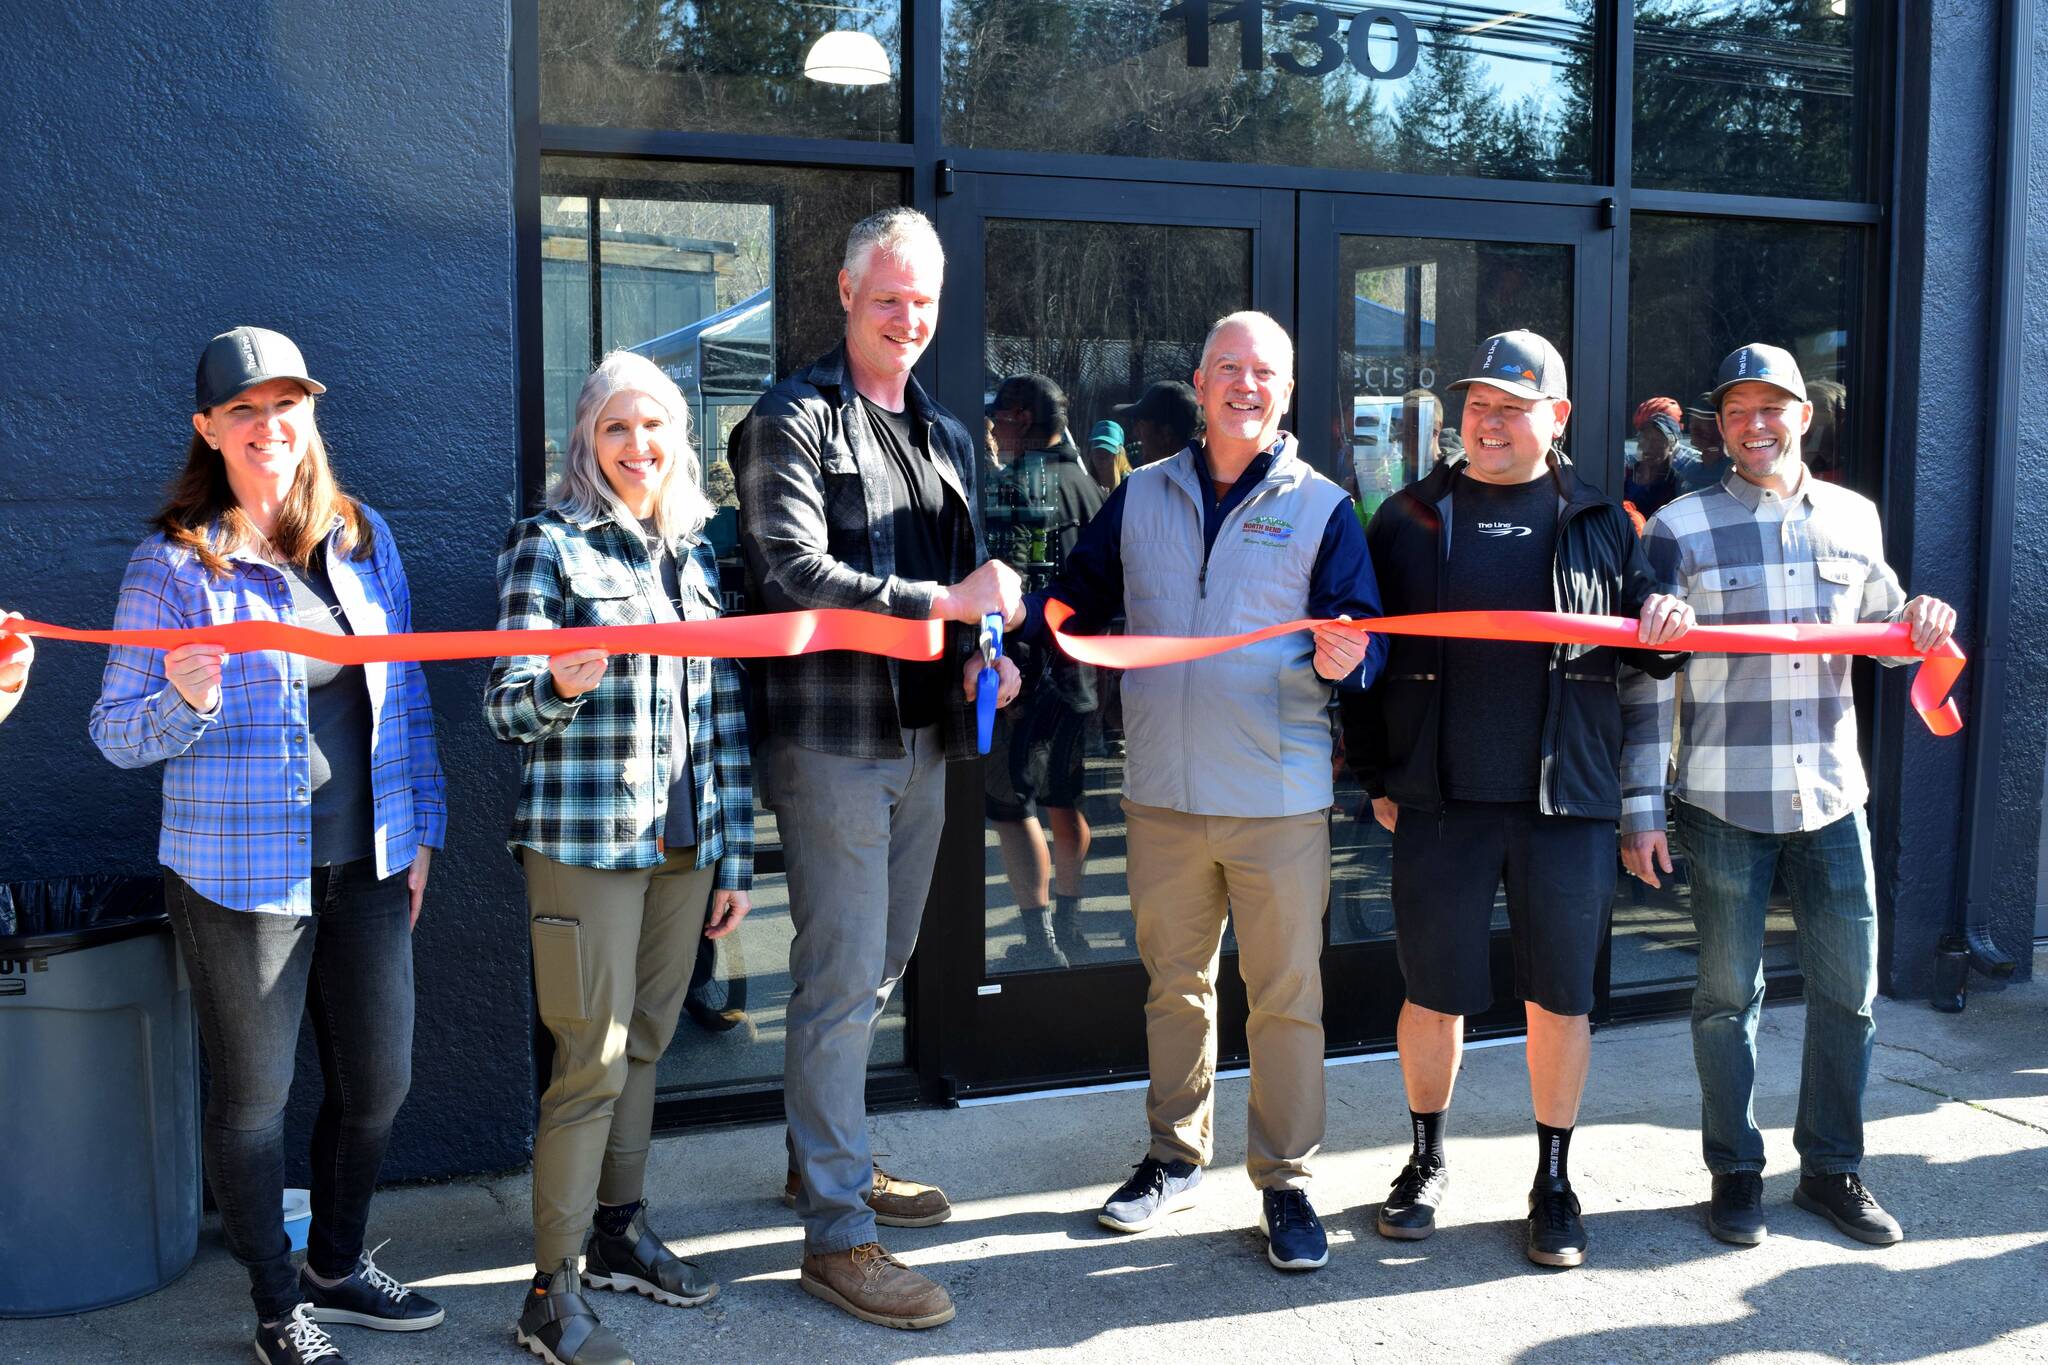 Owners of The Line Bike Experience at their grand opening on March 18. From left: Alex Kunz, Sheryl Tullis, Michael Kunz, North Bend Mayor Rob McFarland, Steve Murakami and James Skinner. Photos by Conor Wilson/Valley Record